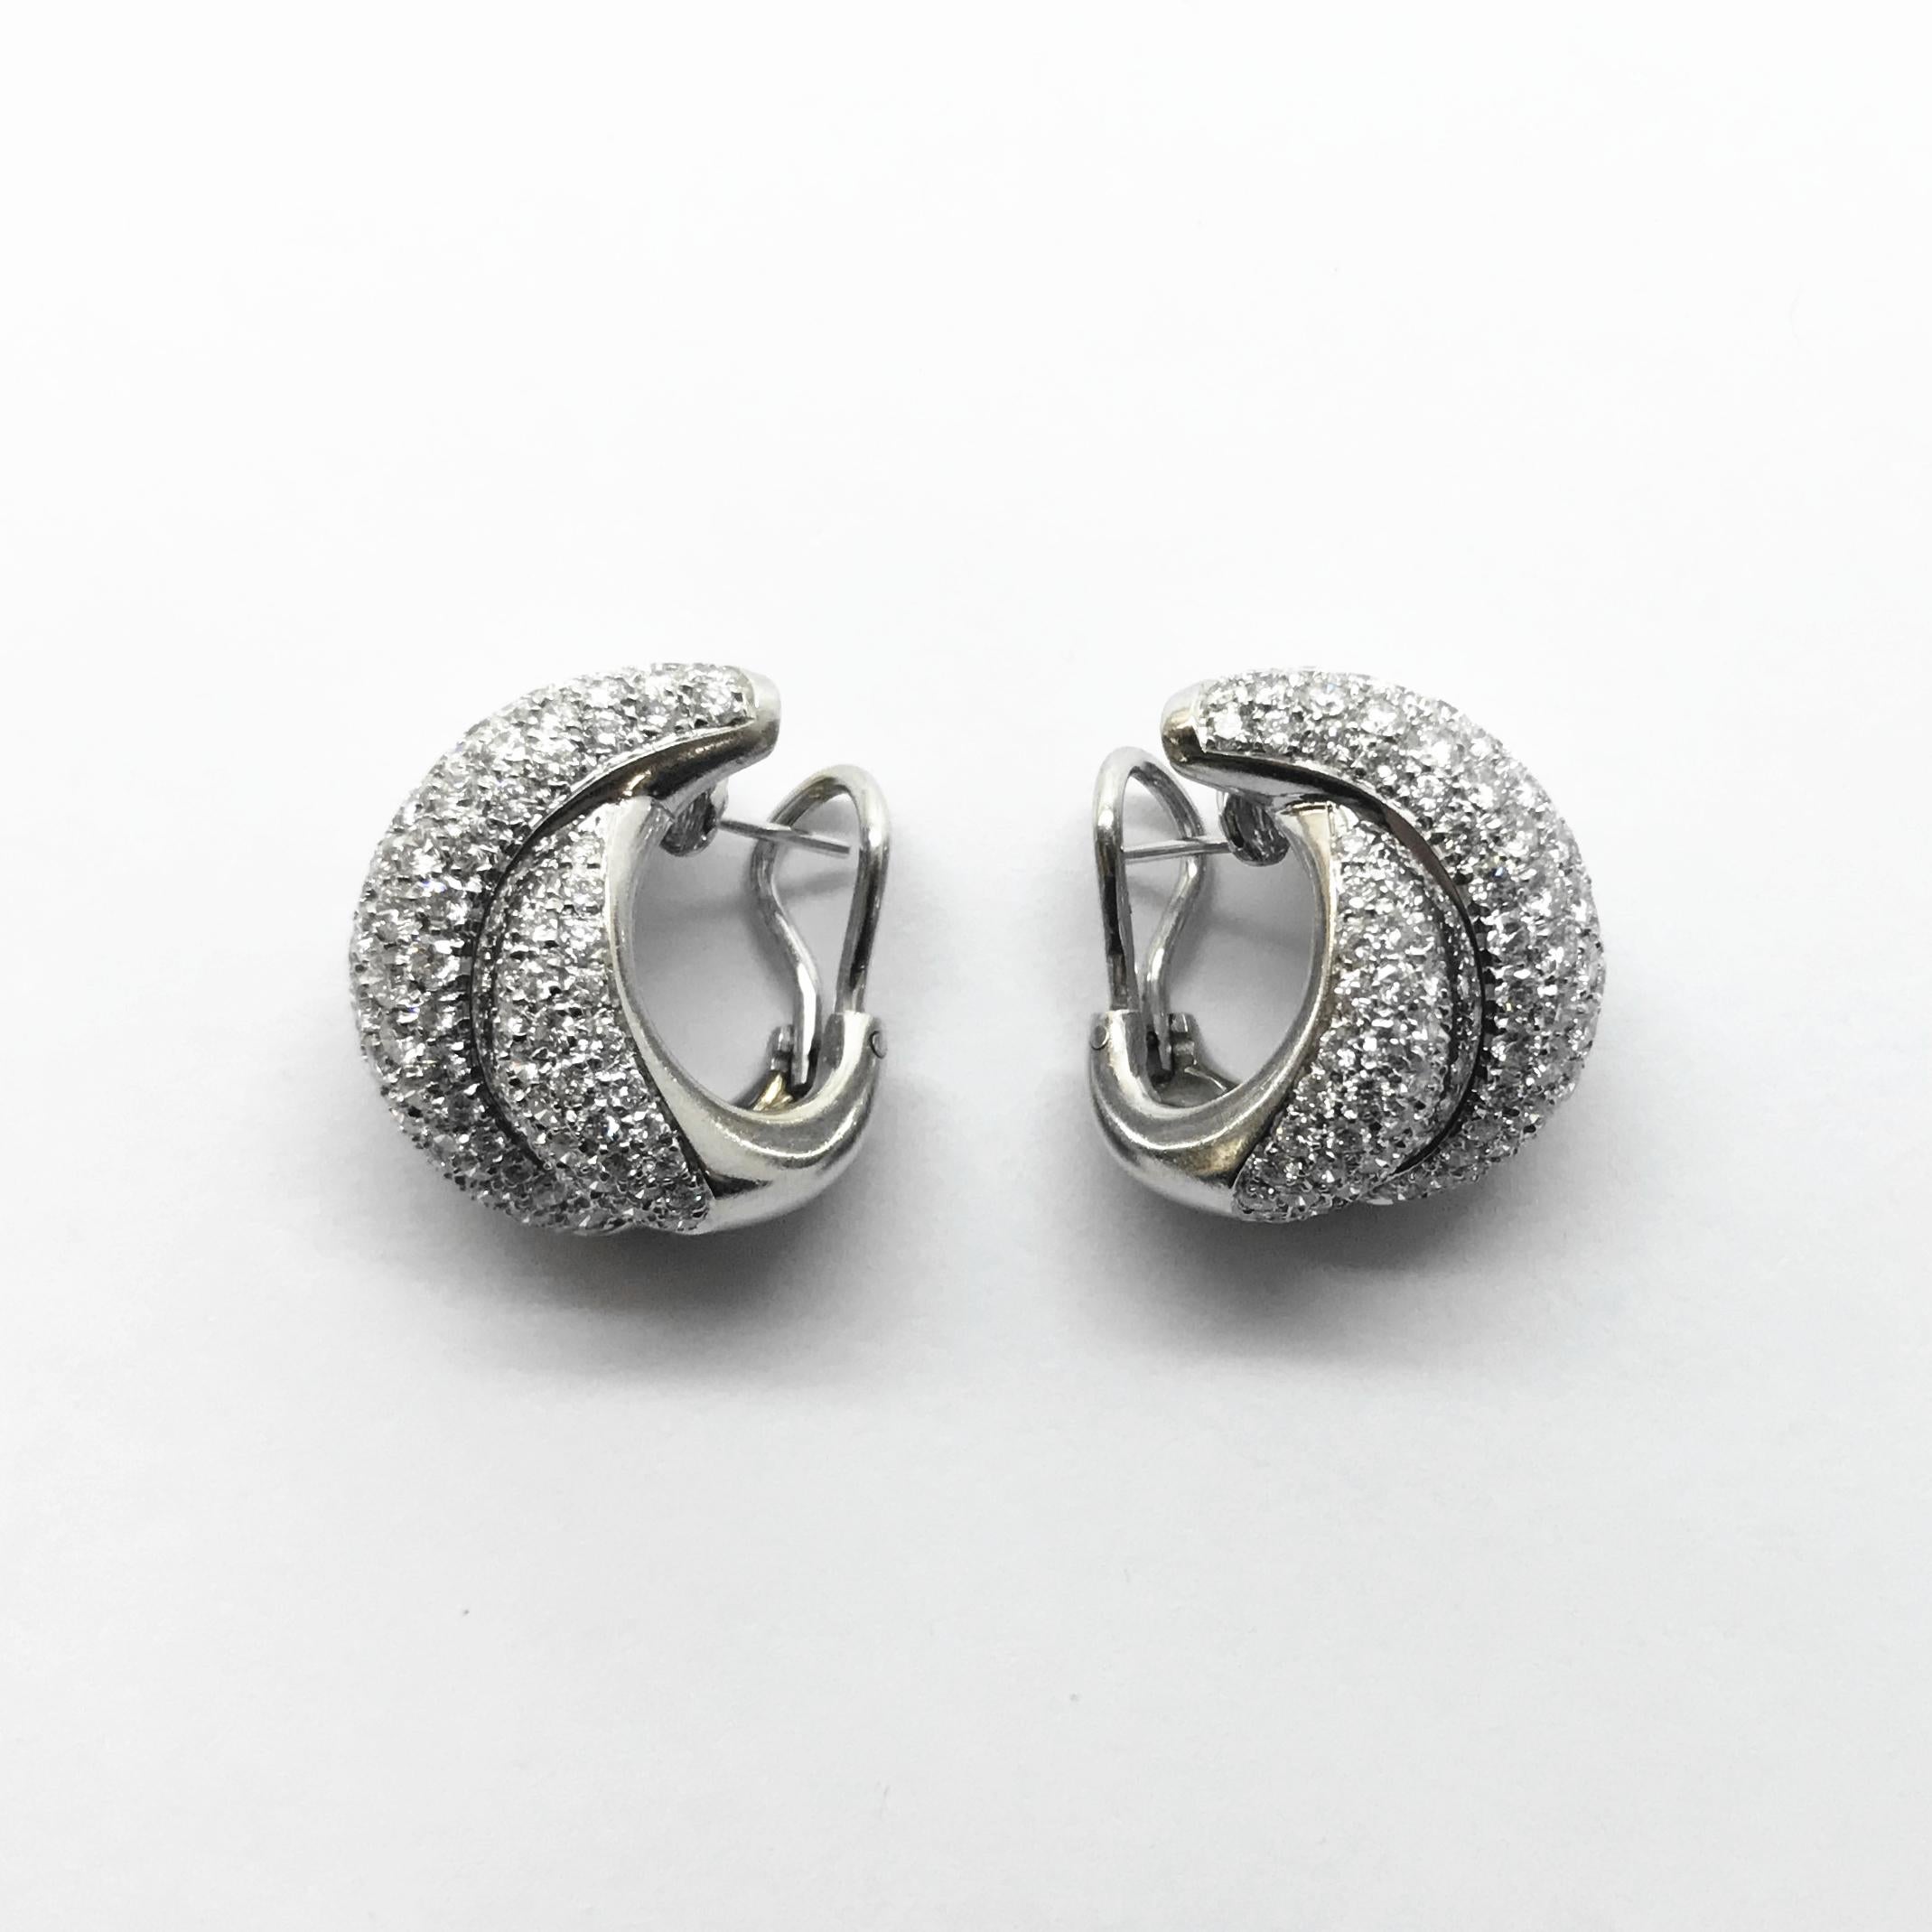 Damiani 18K white gold and diamond pavé hoop earrings with post and clips. The “Gomitolo” collection of a three sectional crossover style is set with graduated sized round brilliant cut diamonds totaling 5.59 cts and estimated to be F-G color and VS